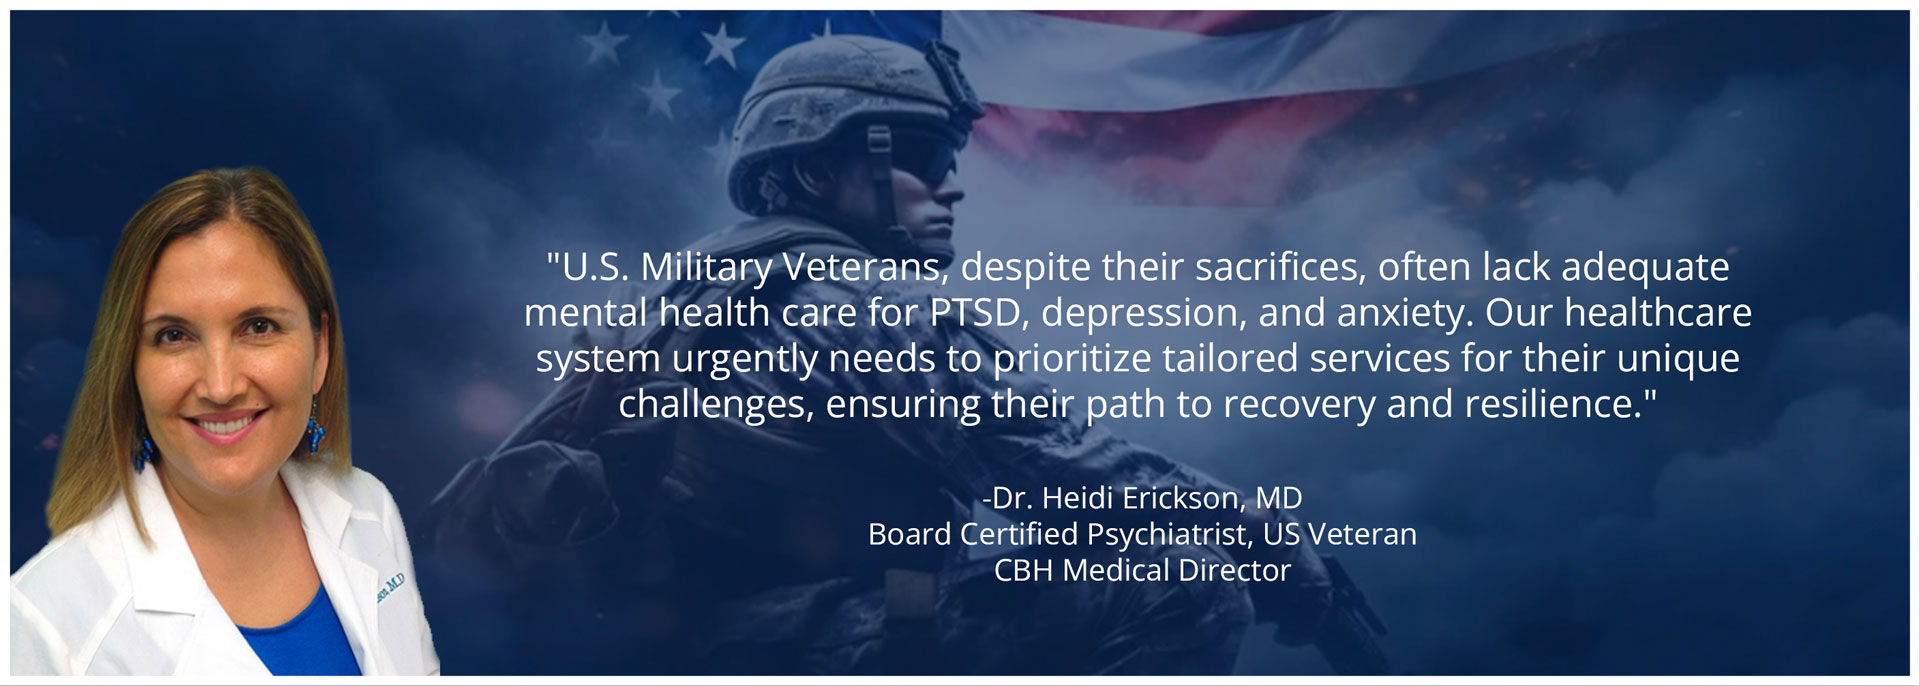 Dr Heidi Erickson quote in front of blue background and military member